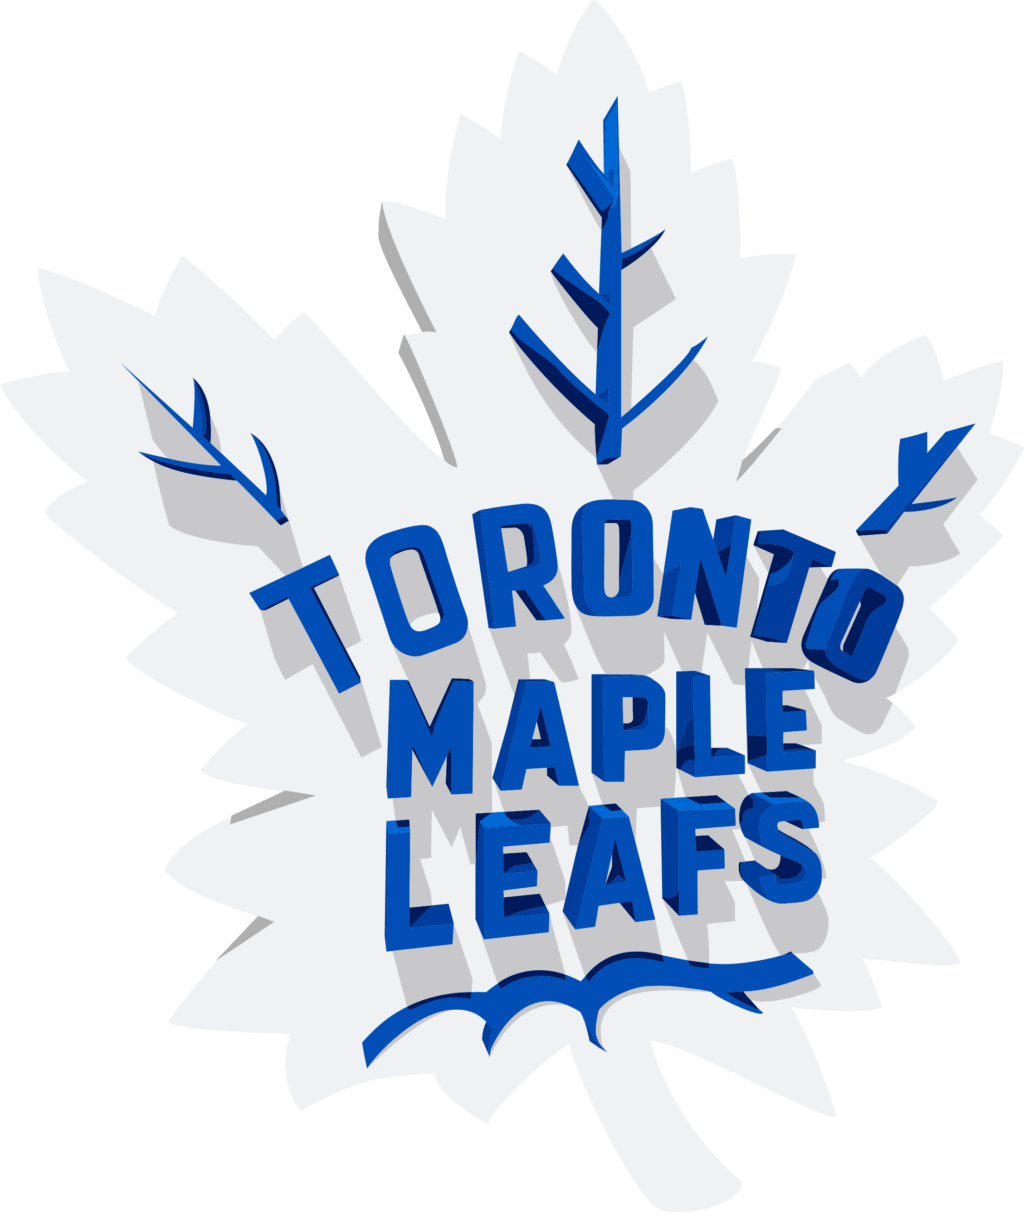 TML 10 NHL Toronto Maple Leafs SVG, SVG Files For Silhouette, Toronto Maple Leafs Files For Cricut, Toronto Maple Leafs SVG, DXF, EPS, PNG Instant Download. Toronto Maple Leafs SVG, SVG Files For Silhouette, Toronto Maple Leafs Files For Cricut, Toronto Maple Leafs SVG, DXF, EPS, PNG Instant Download.